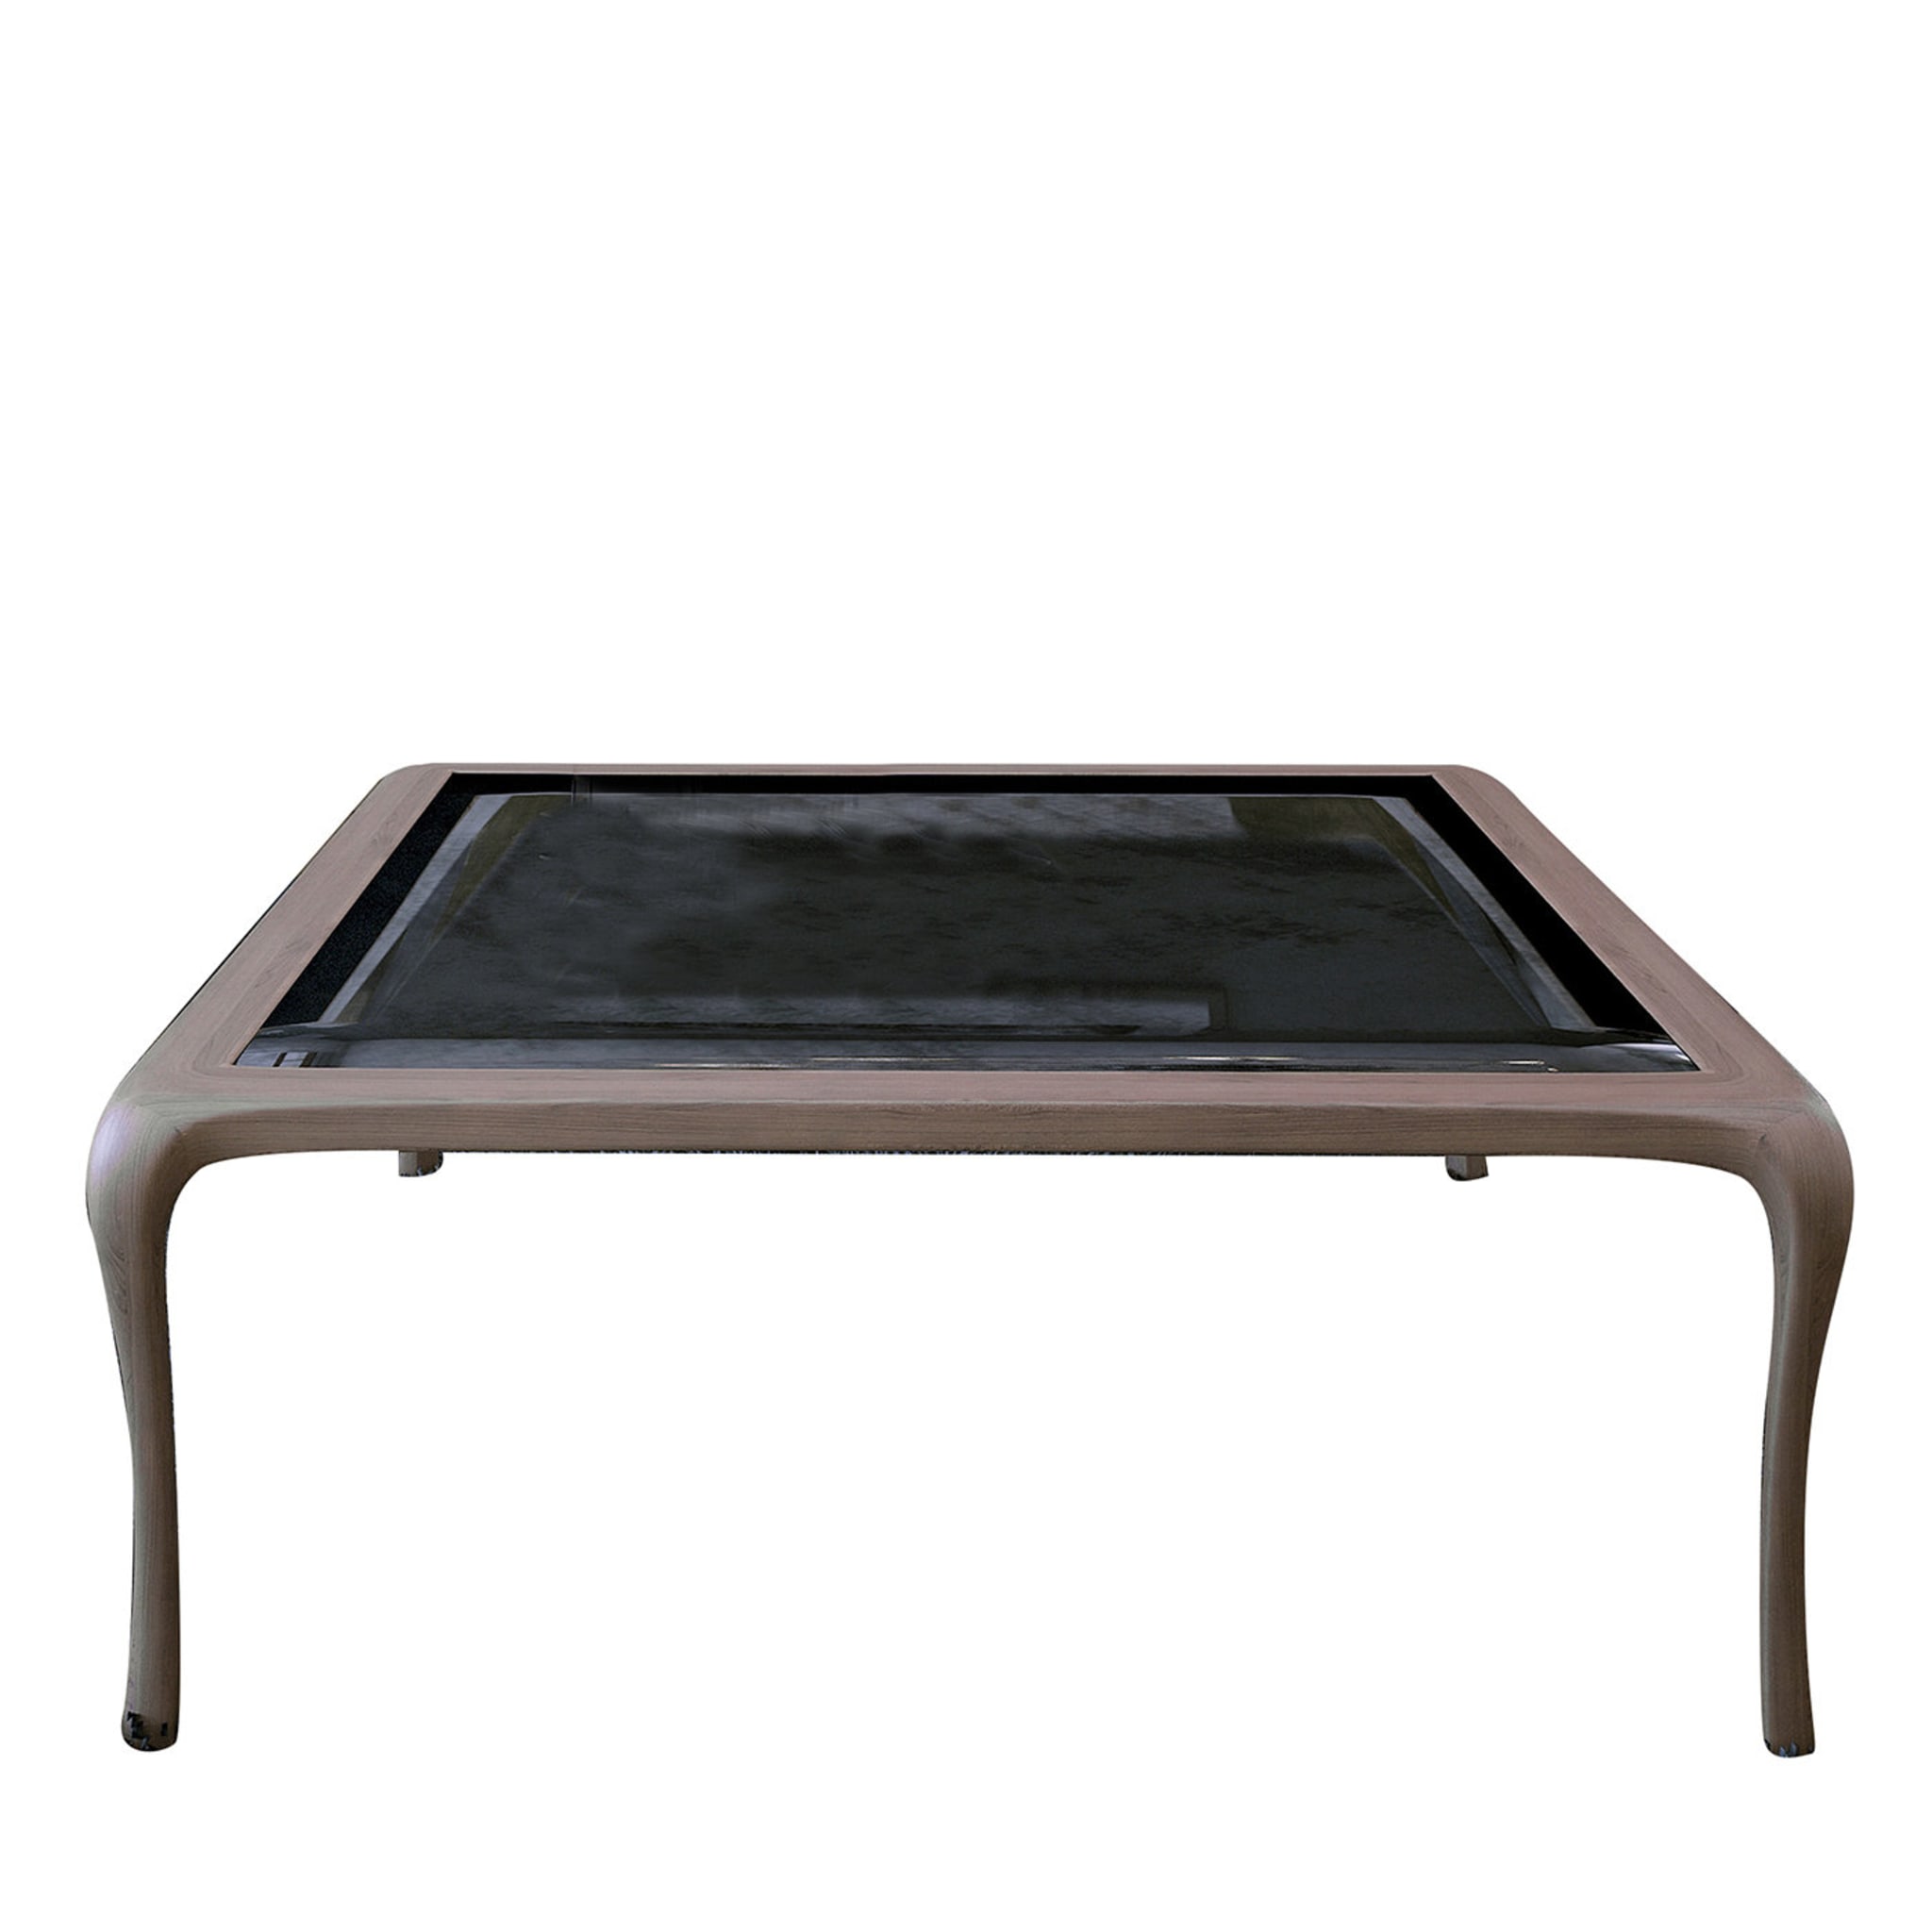 Light-Walnut Square Coffee Table with Glass Top - Main view